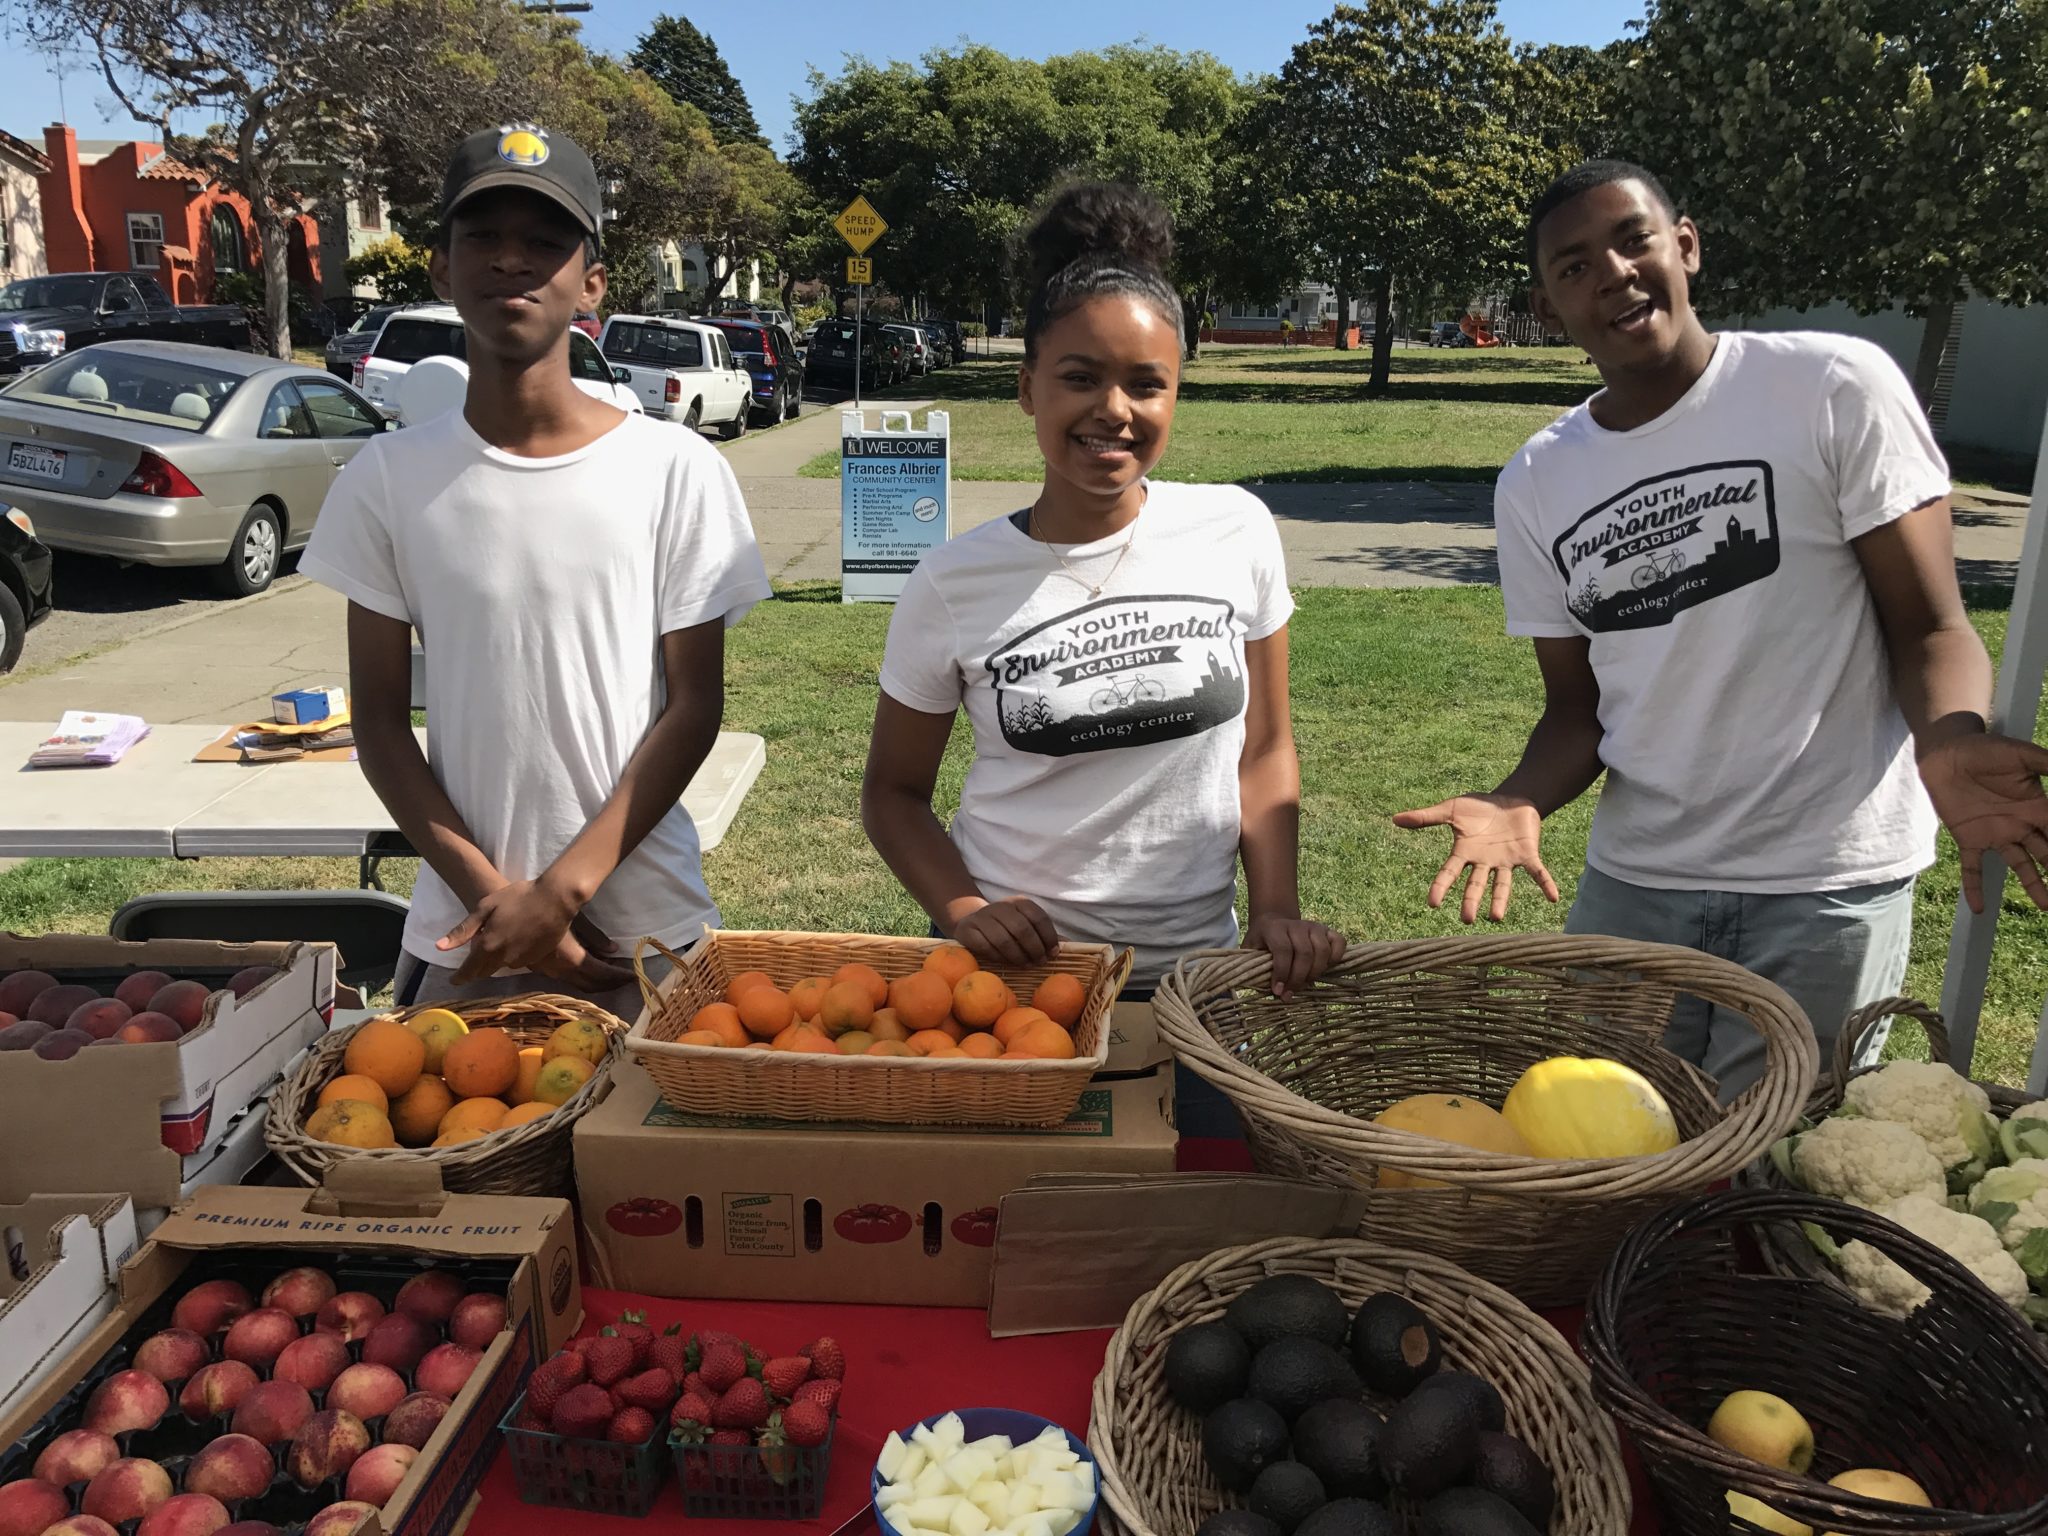 Student volunteers at the farmers' market.